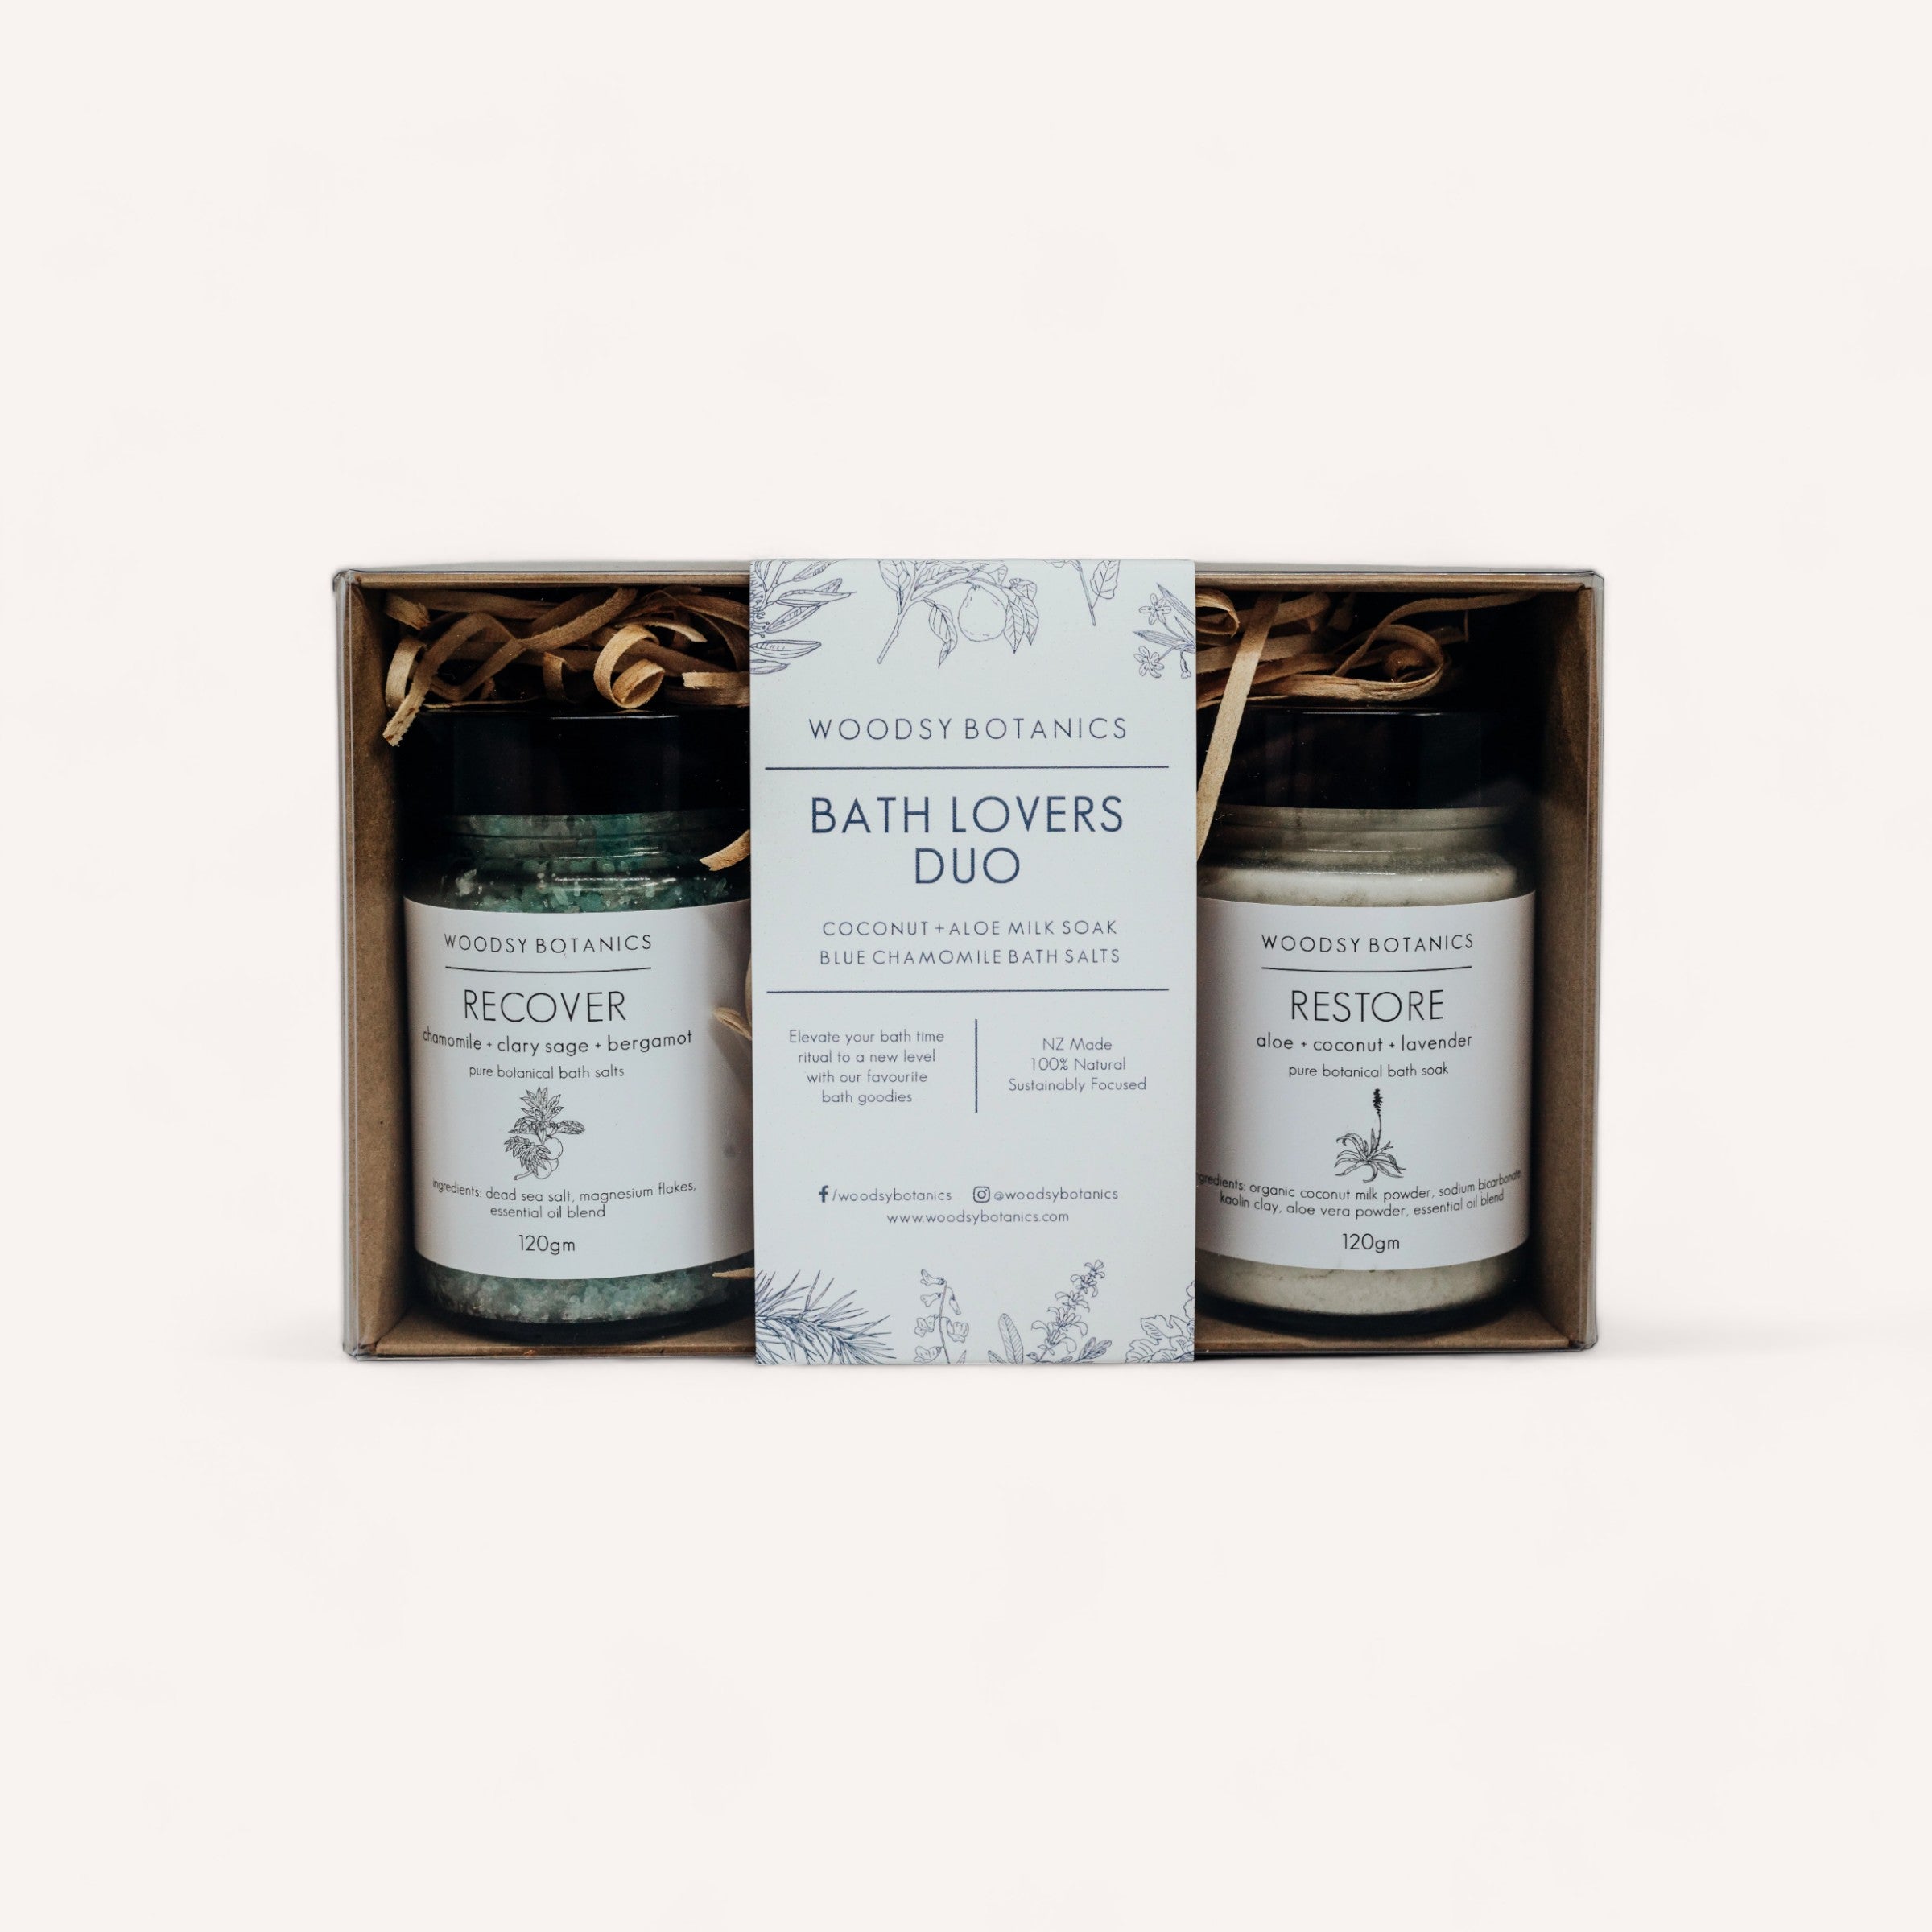 An elegant Bath Lovers gift set containing two jars of woodsy botanics bath salts, with "Recover Salts" and "Restore Soak" blends, presented in a tidy box with a descriptive insert by Woodsy Botanics.